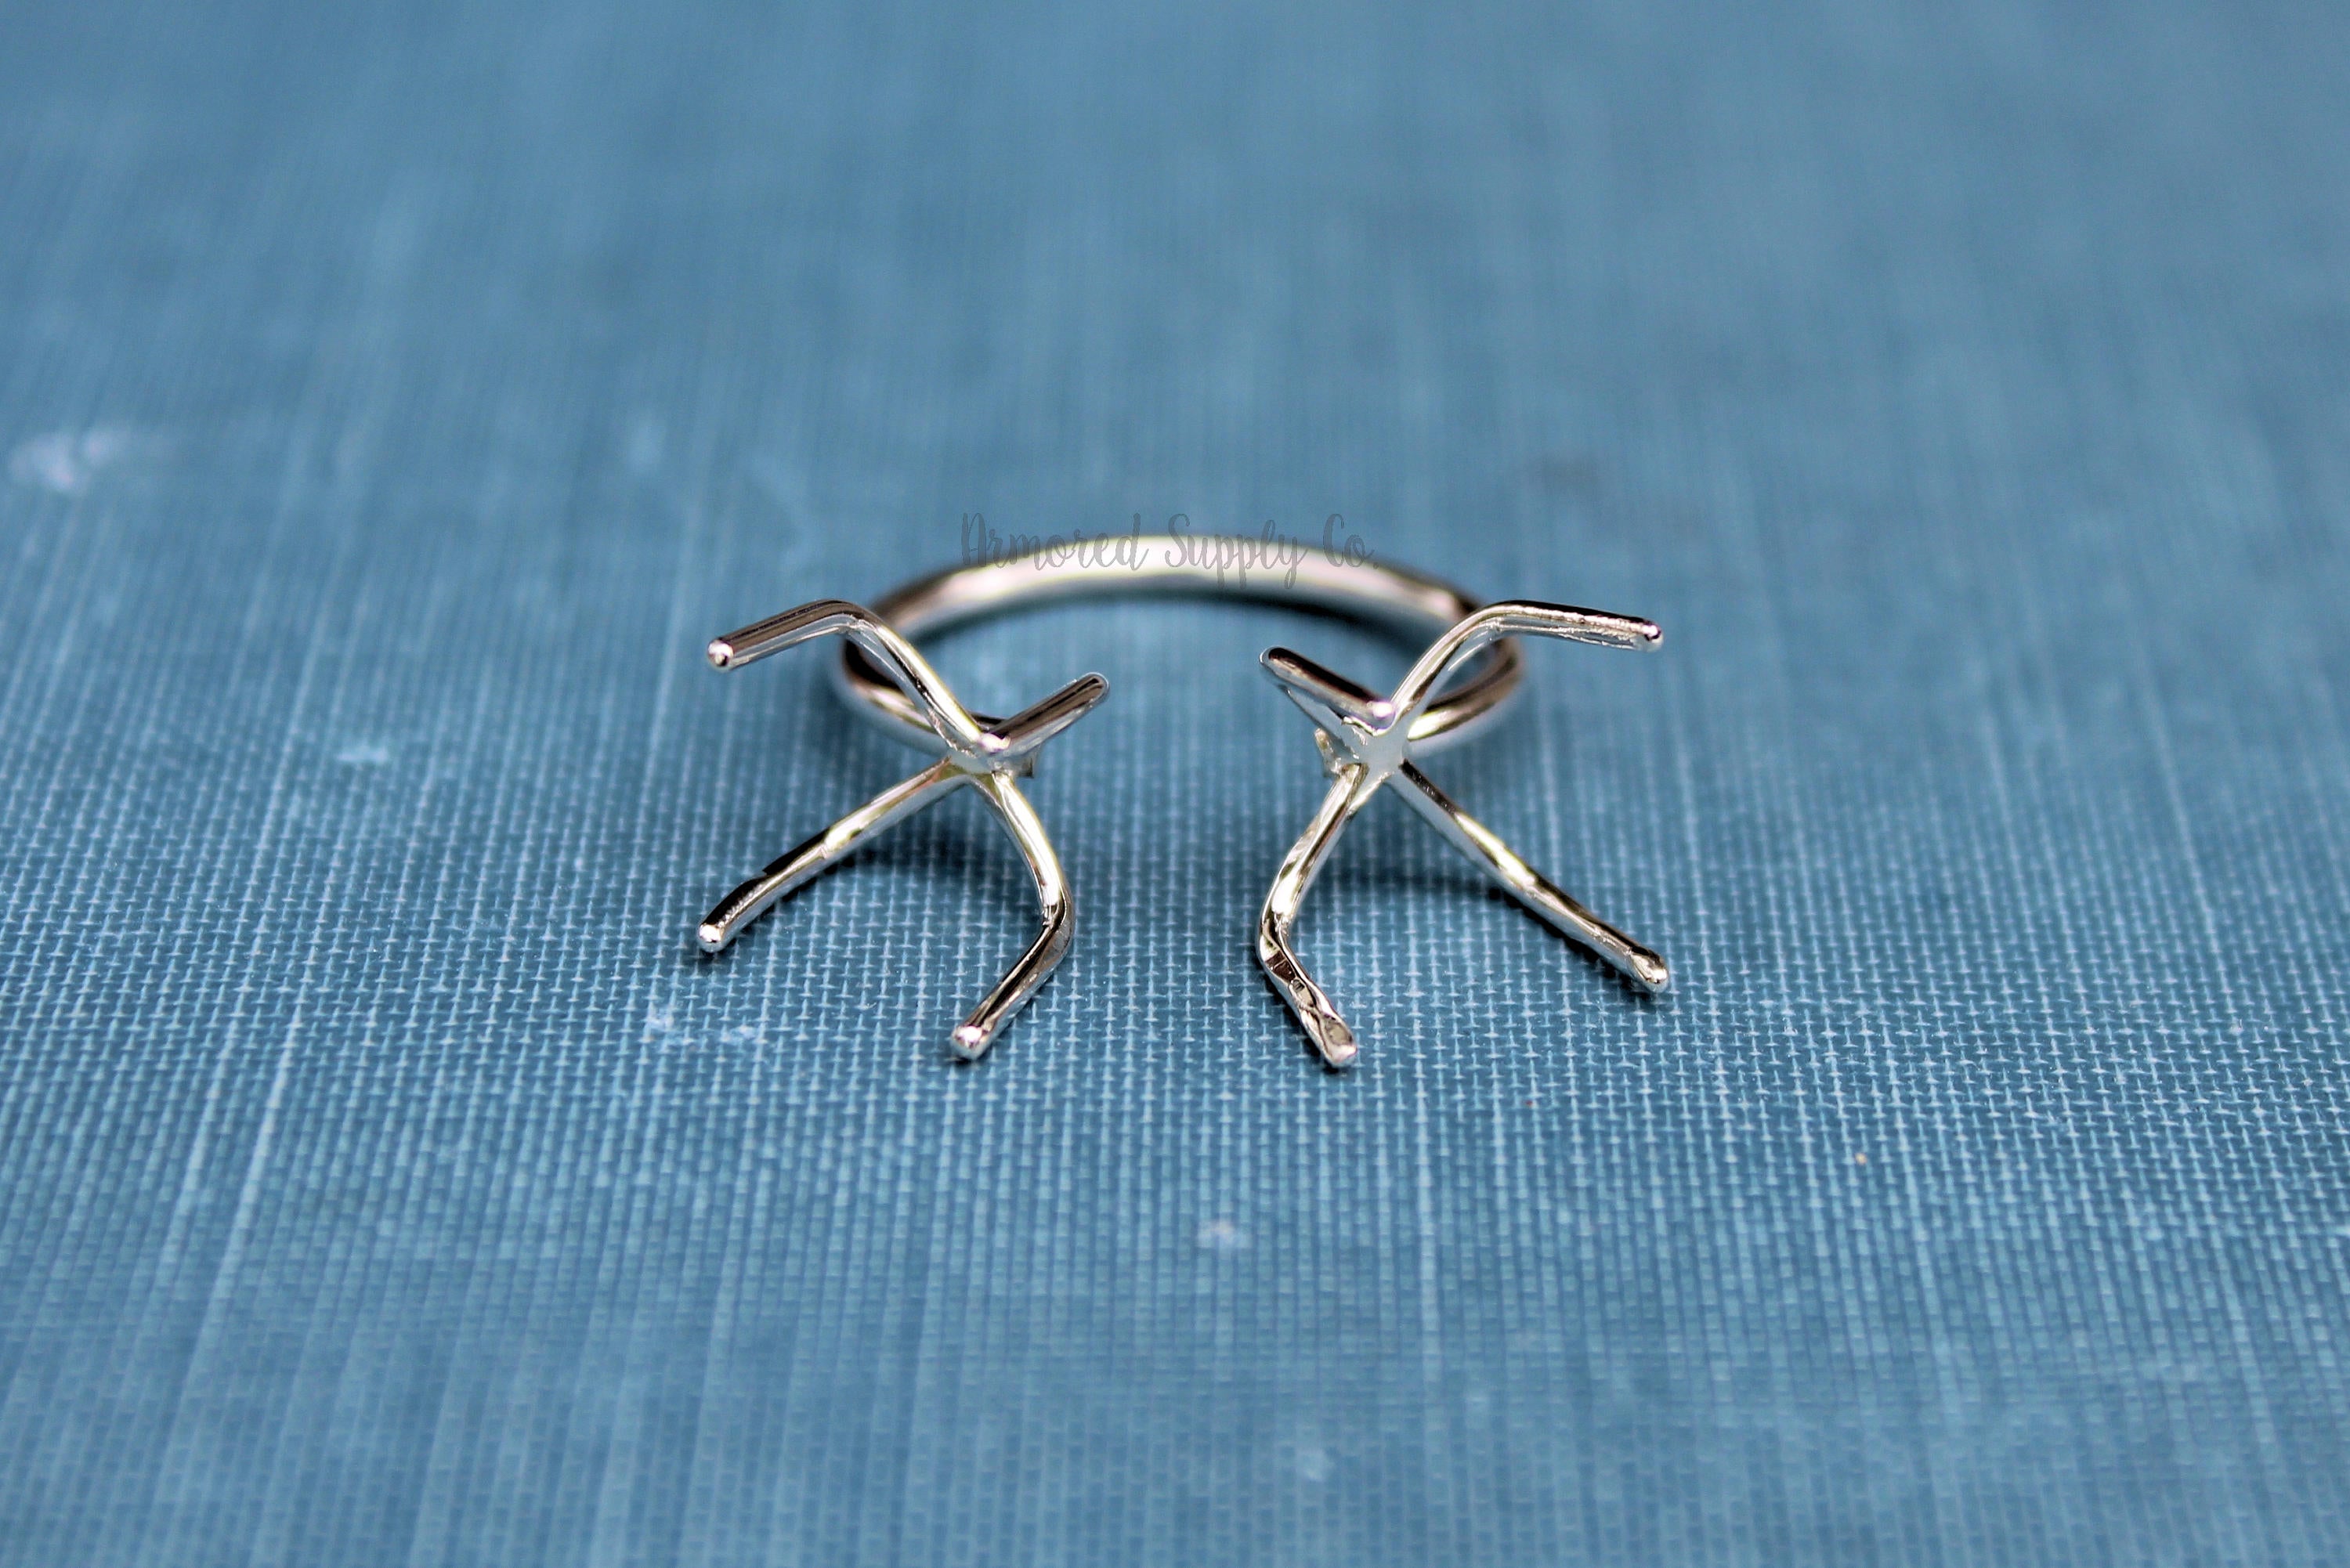 Claw Prong Ring Blank, Adjustable Open Ring Band, Double Claw Prong Silver Ring Blank, Wholesale Silver Ring, DIY Jewelry, Jewelry Supplies